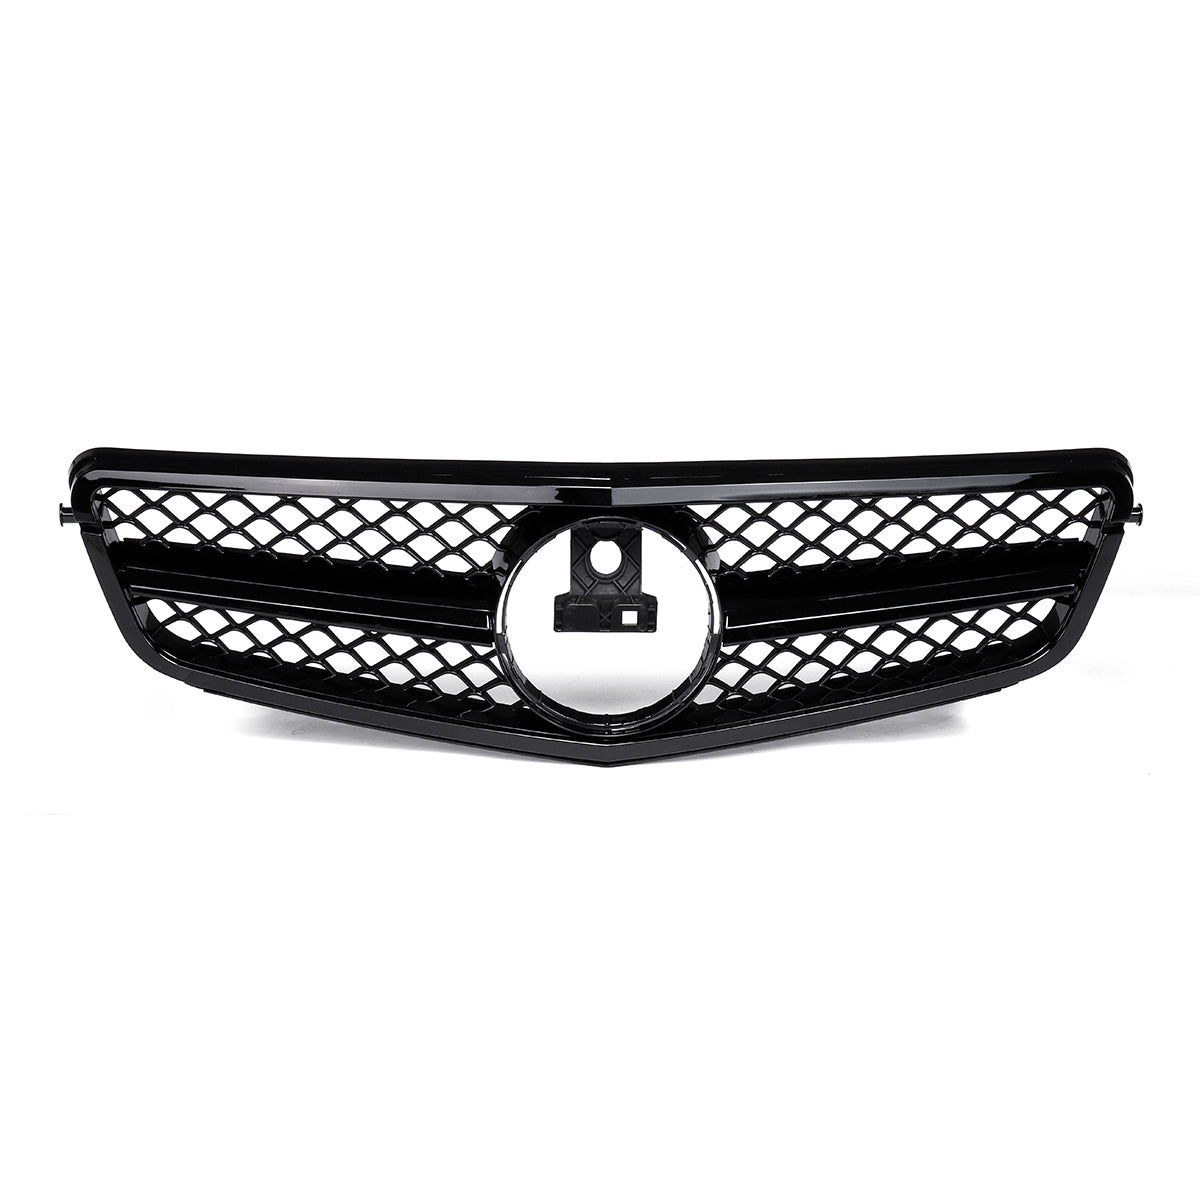 Black Car C63 AMG Style Front Upper Grille Grill For Mercedes C Class W204 C180 C200 C300 C350 2008-2014